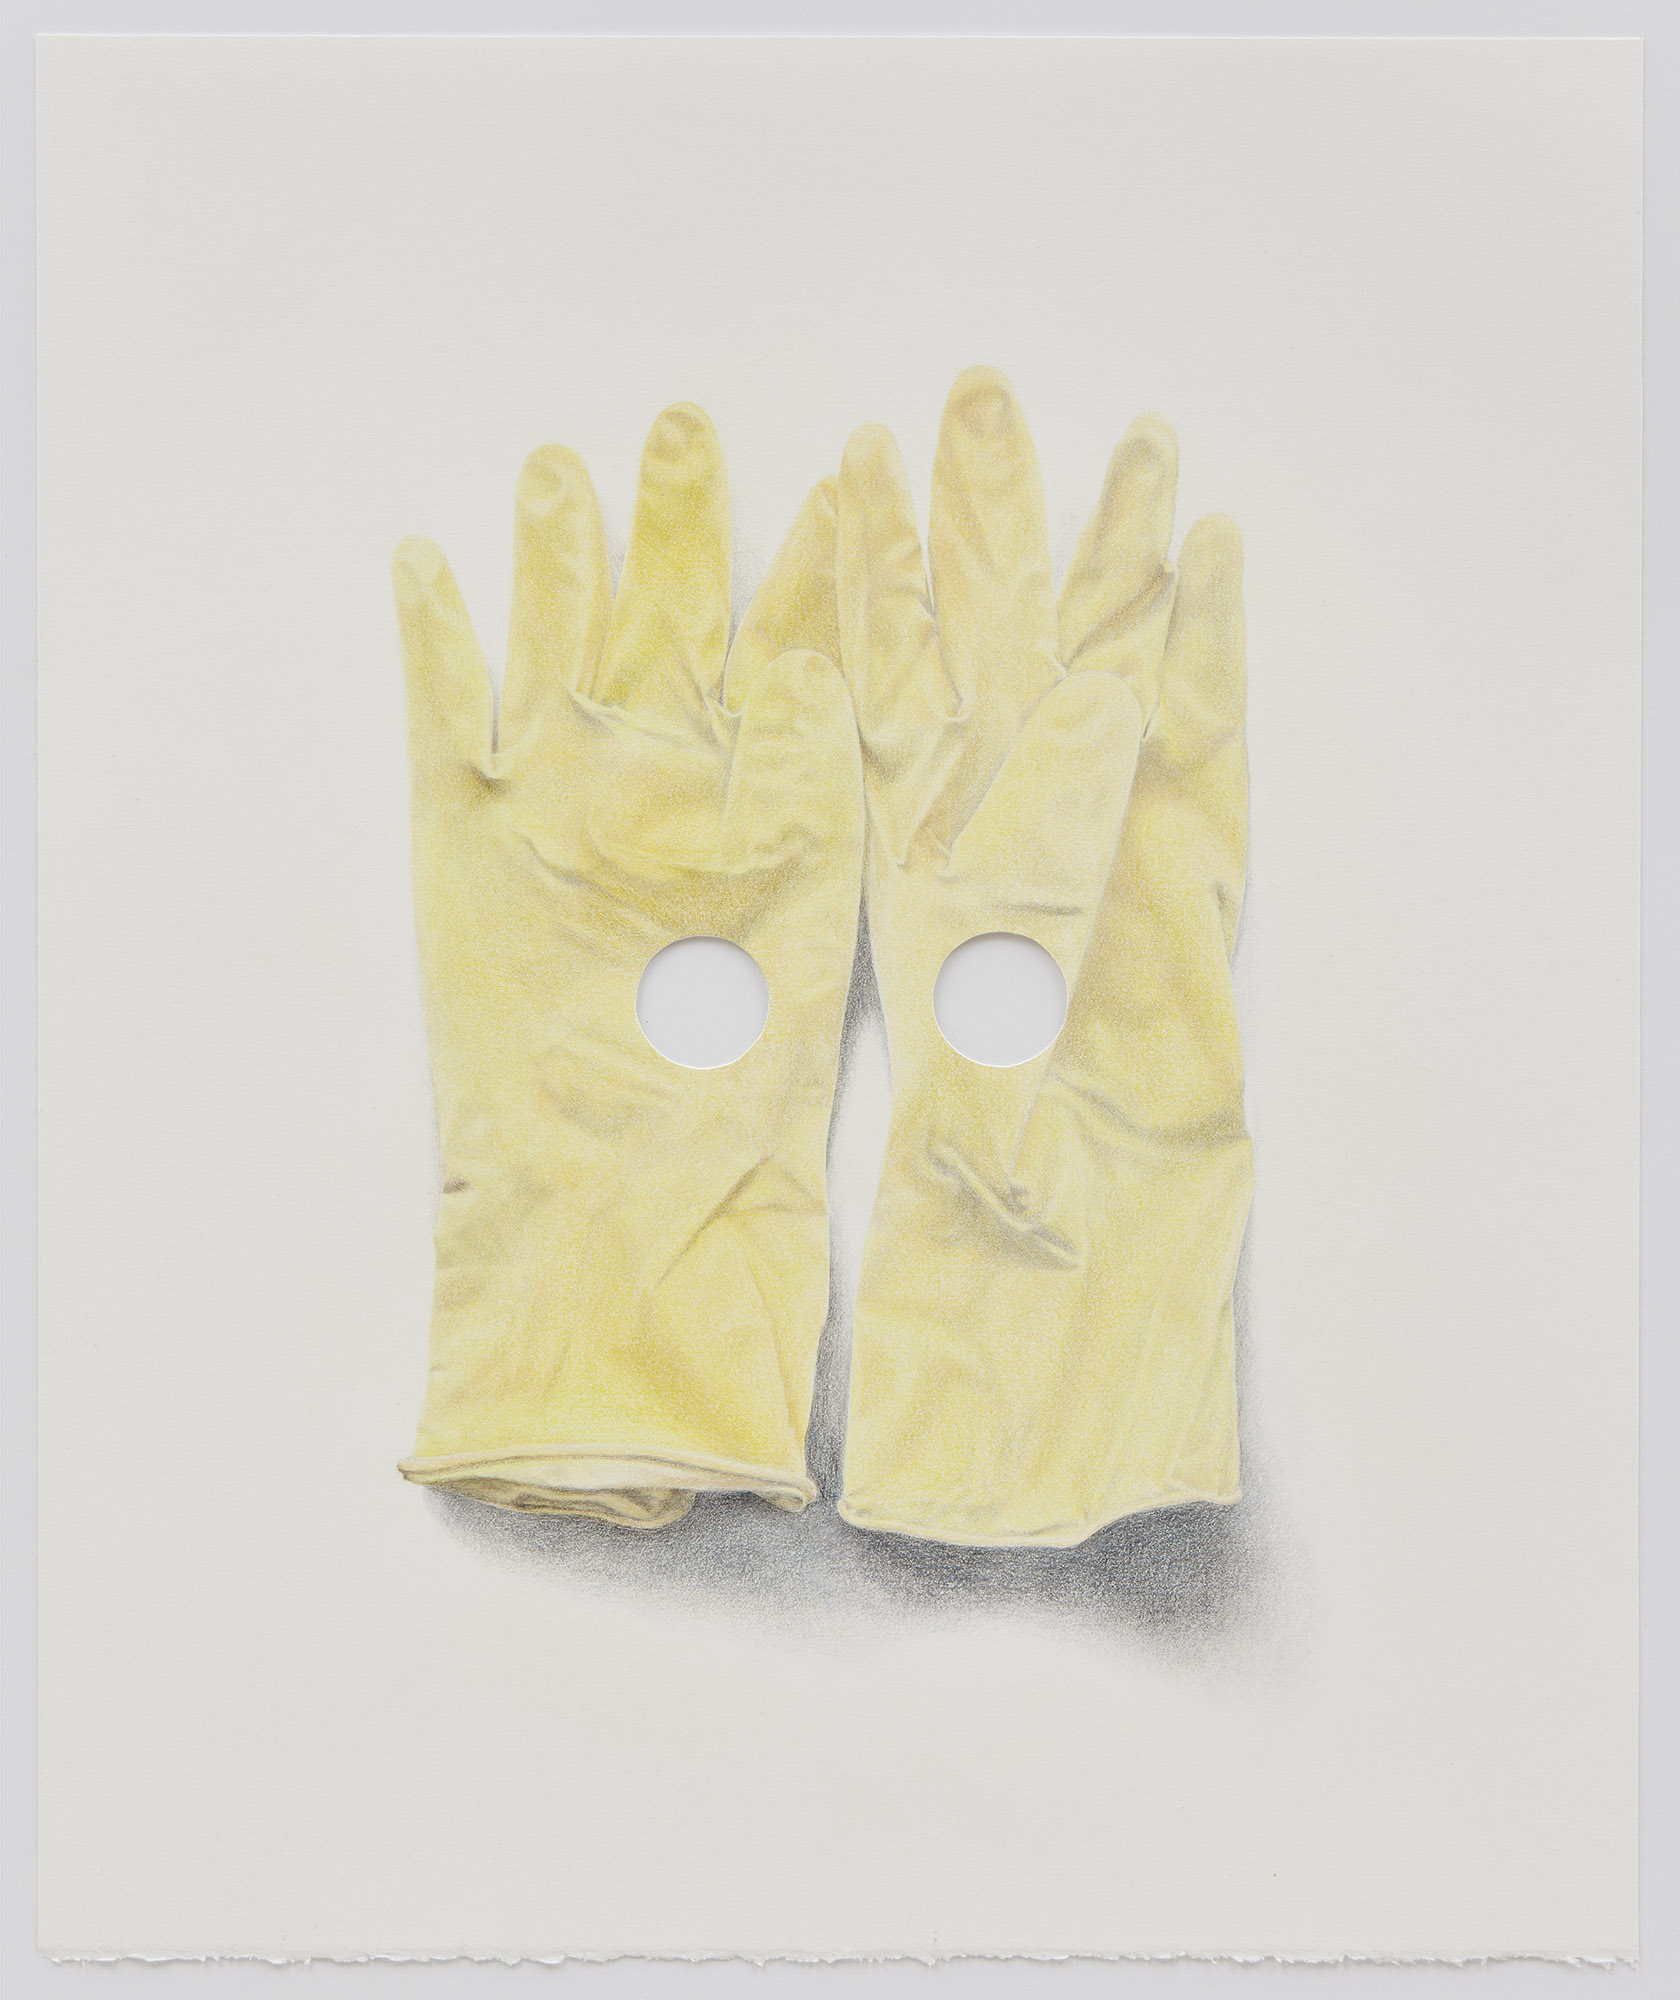 The rubber glove, a humble accessory loaded with meaning. Look for the rubber glove in our Art Futures project - the one image that is seen on both sides of the work. 